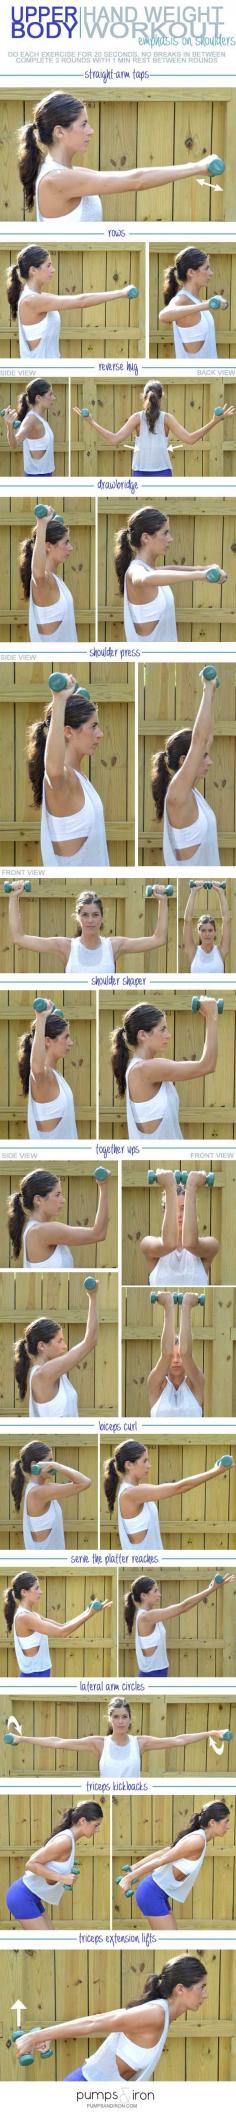 Upper-Body Hand Weight Workout (emphasis on shoulders) #Workout #BeFit #Exercise